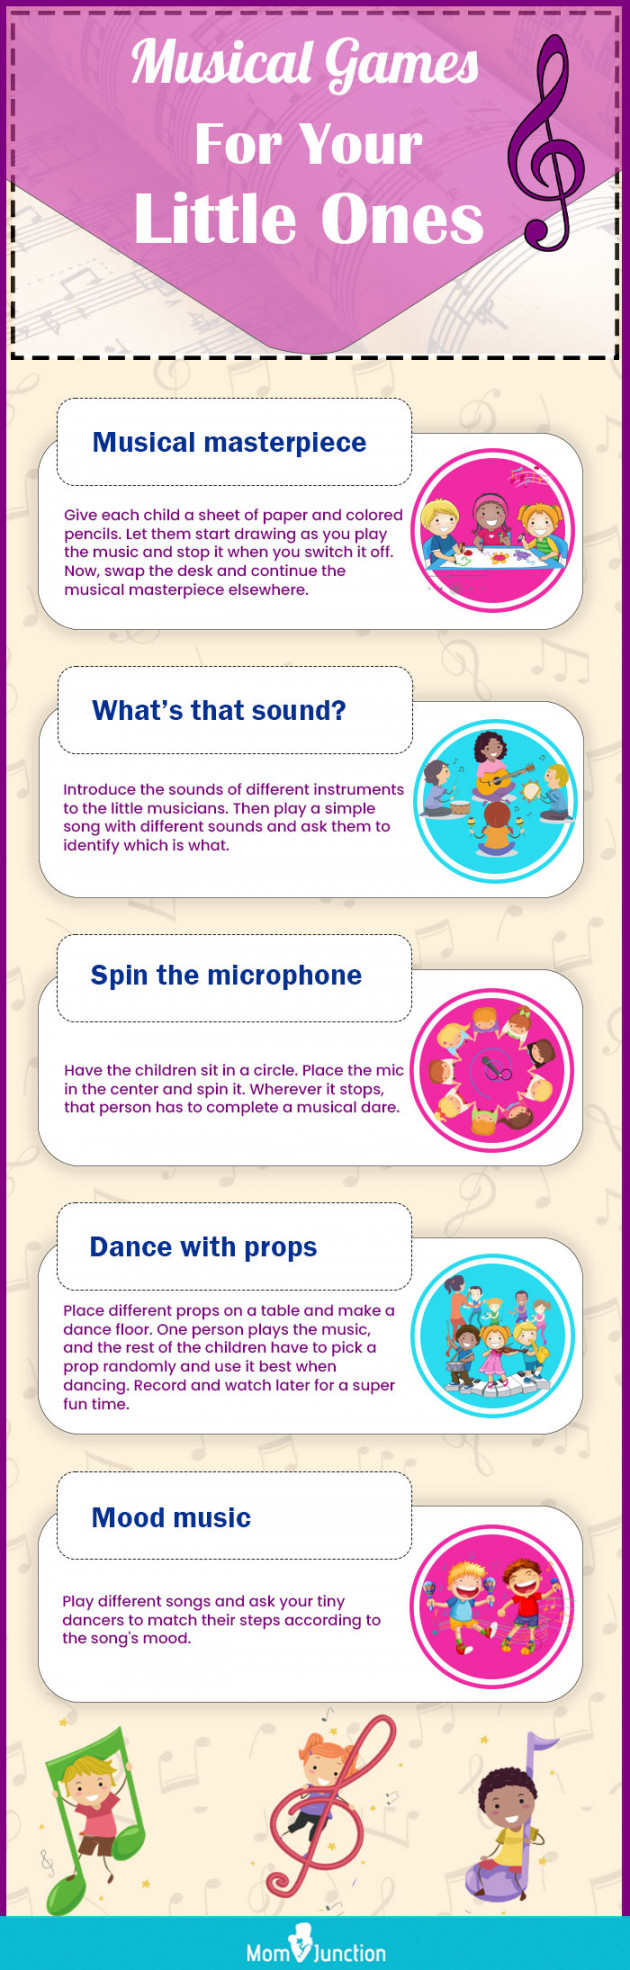 Amazing Music Games And Activities For Kids